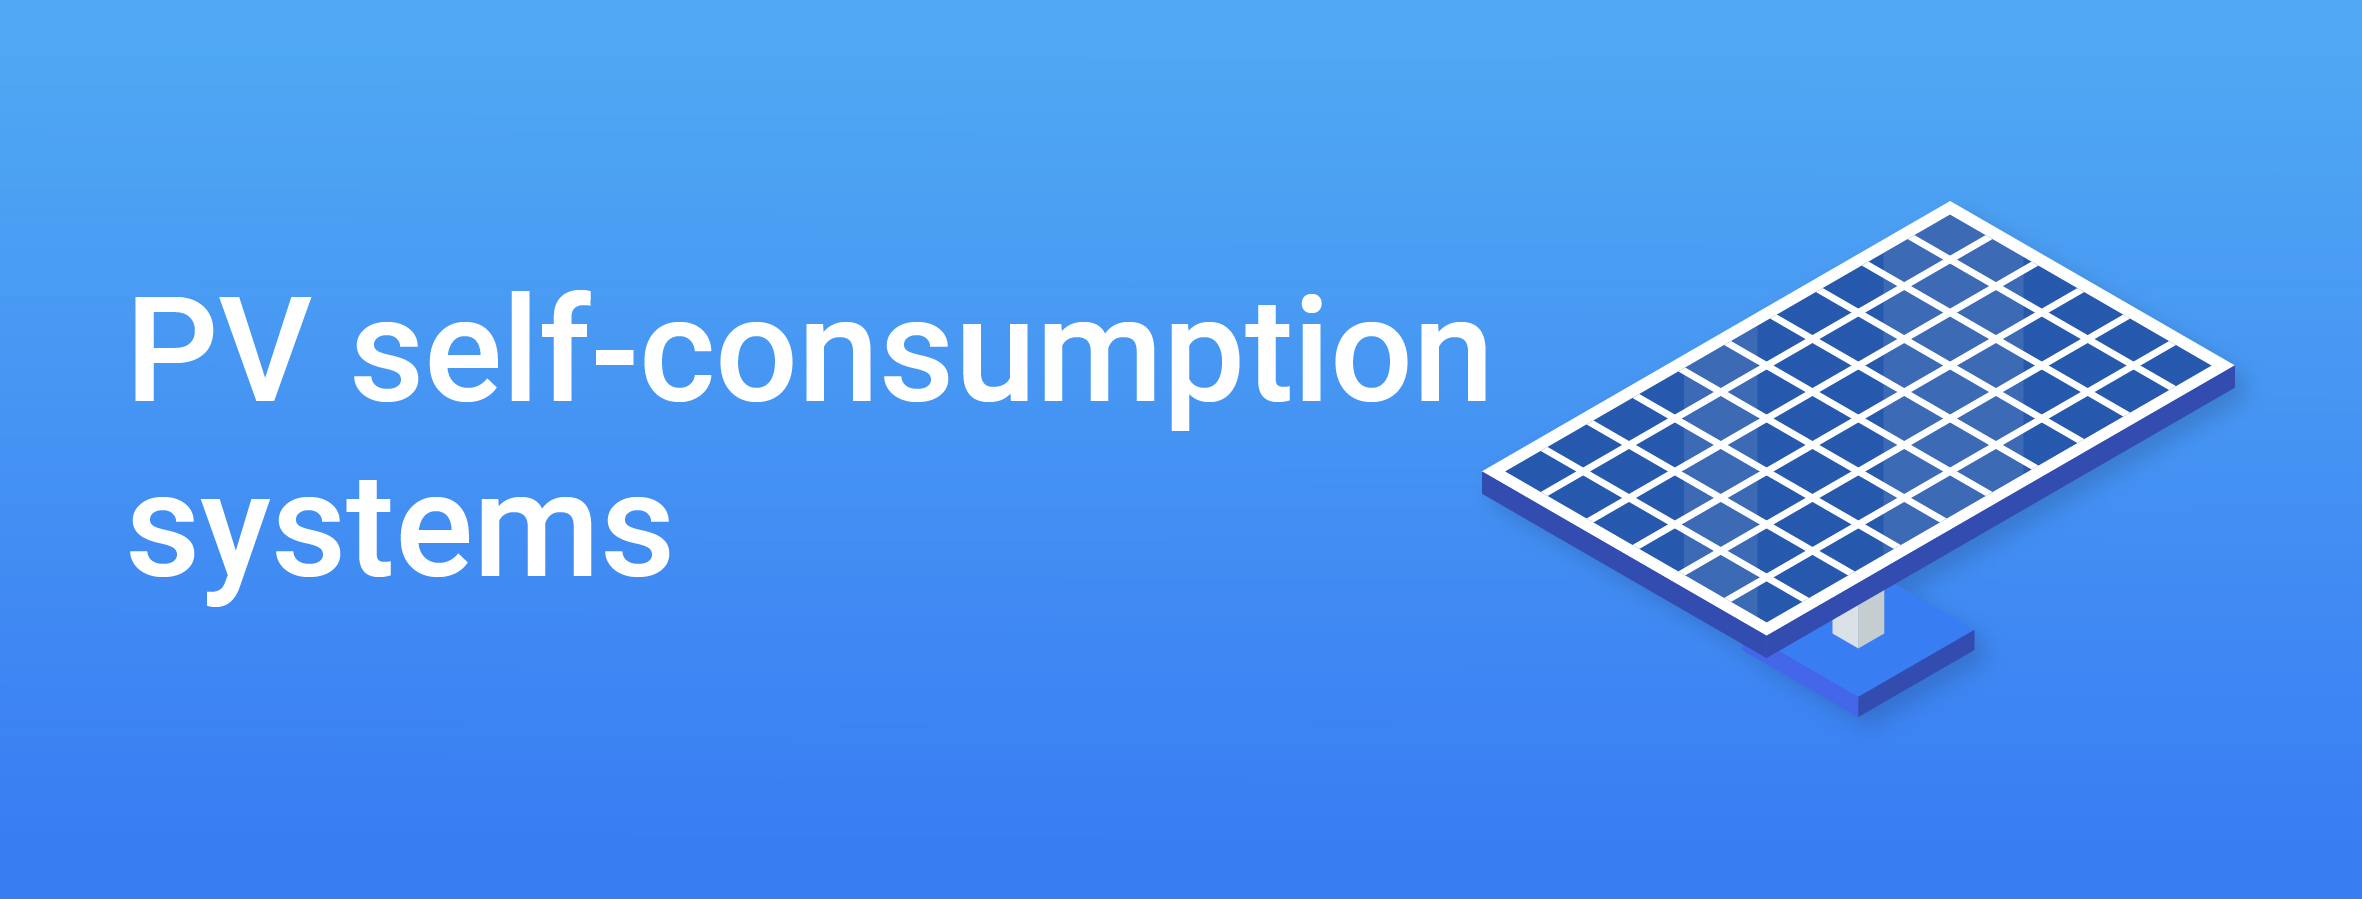 PV SELF-CONSUMPTION SYSTEMS